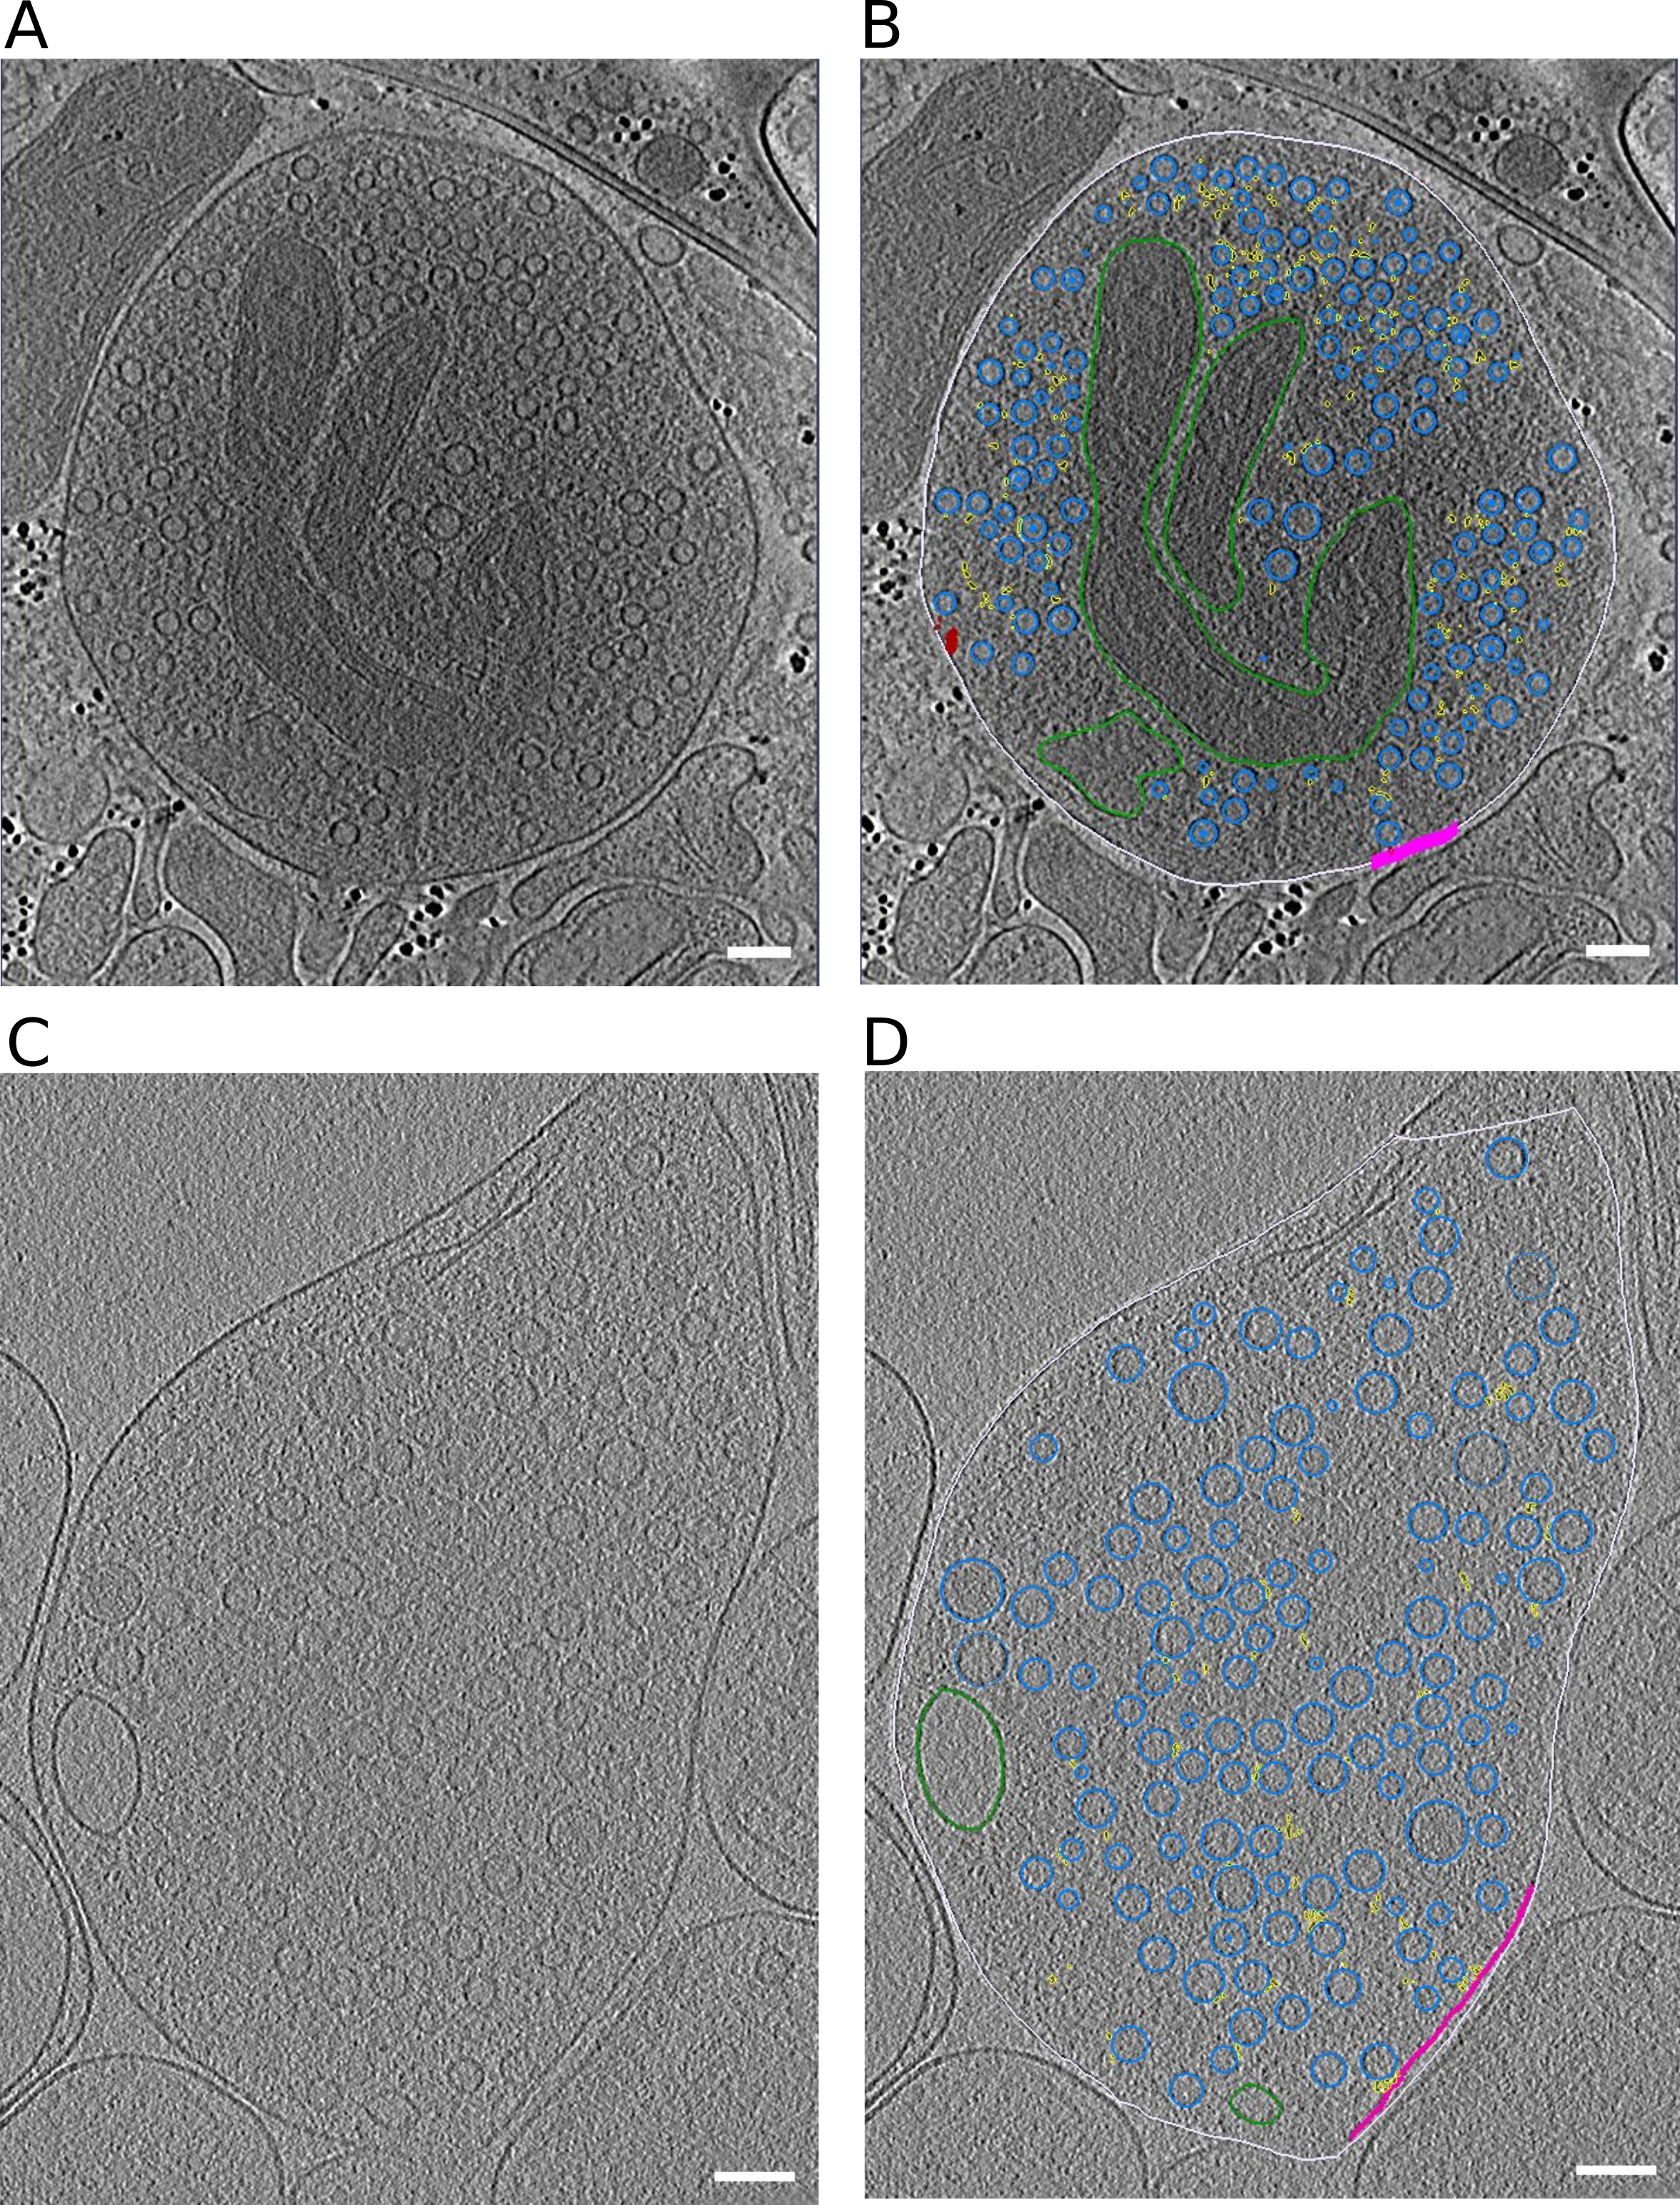 Figure S2: Representative slices through tomograms. (A, B) Tomographic slice without (A) and with (B) segmentation of synaptosome with late fusion events. (C,D) Tomographic slice without (C) and with (D) segmentation of WT SNAP-25 neurons. Segmentation colors: off-white = cell outline; pink = active zone; blue = synaptic vesicles; green = mitochondria; yellow = connectors, red = tethers. Scale bar, 100 nm.